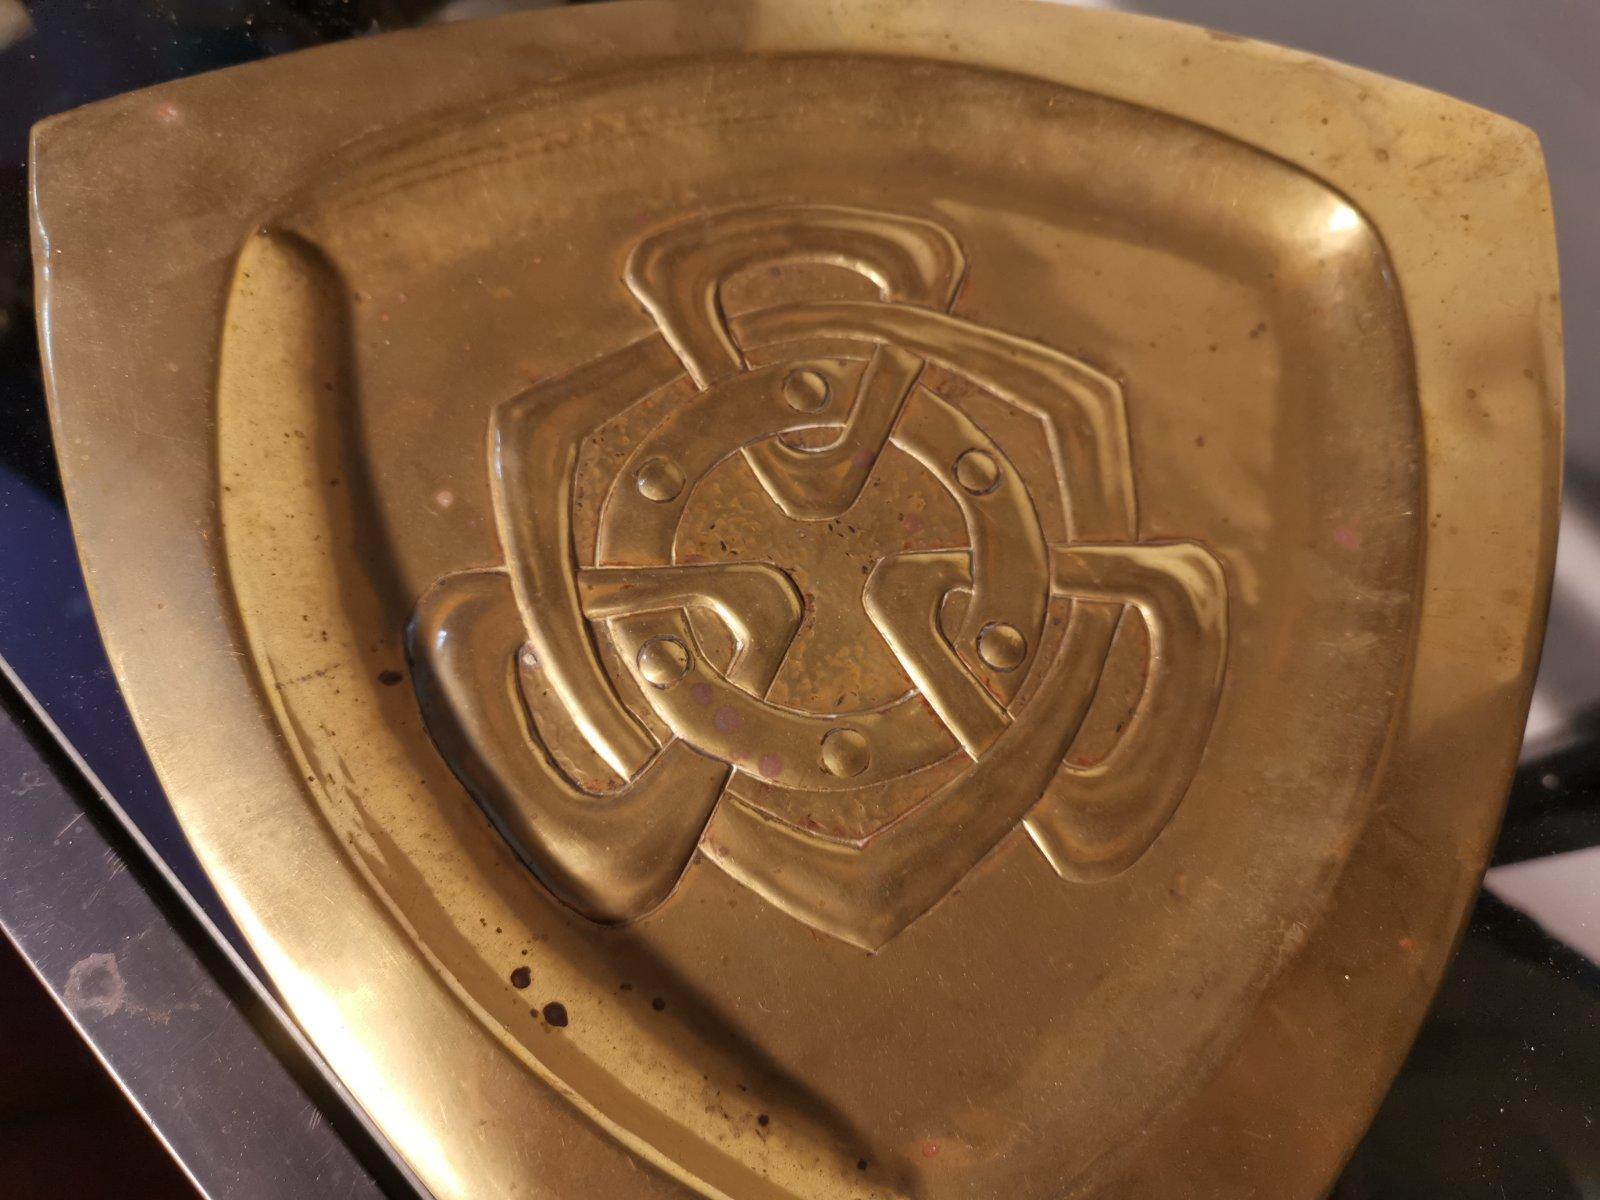 Margret Gilmour school.
An Arts and Crafts Glasgow School brass pin or card tray with Celtic interlaced decoration. 
Its triangular shape continues with tri-angular Celtic decoration to the center with a circular band with roundels within it.